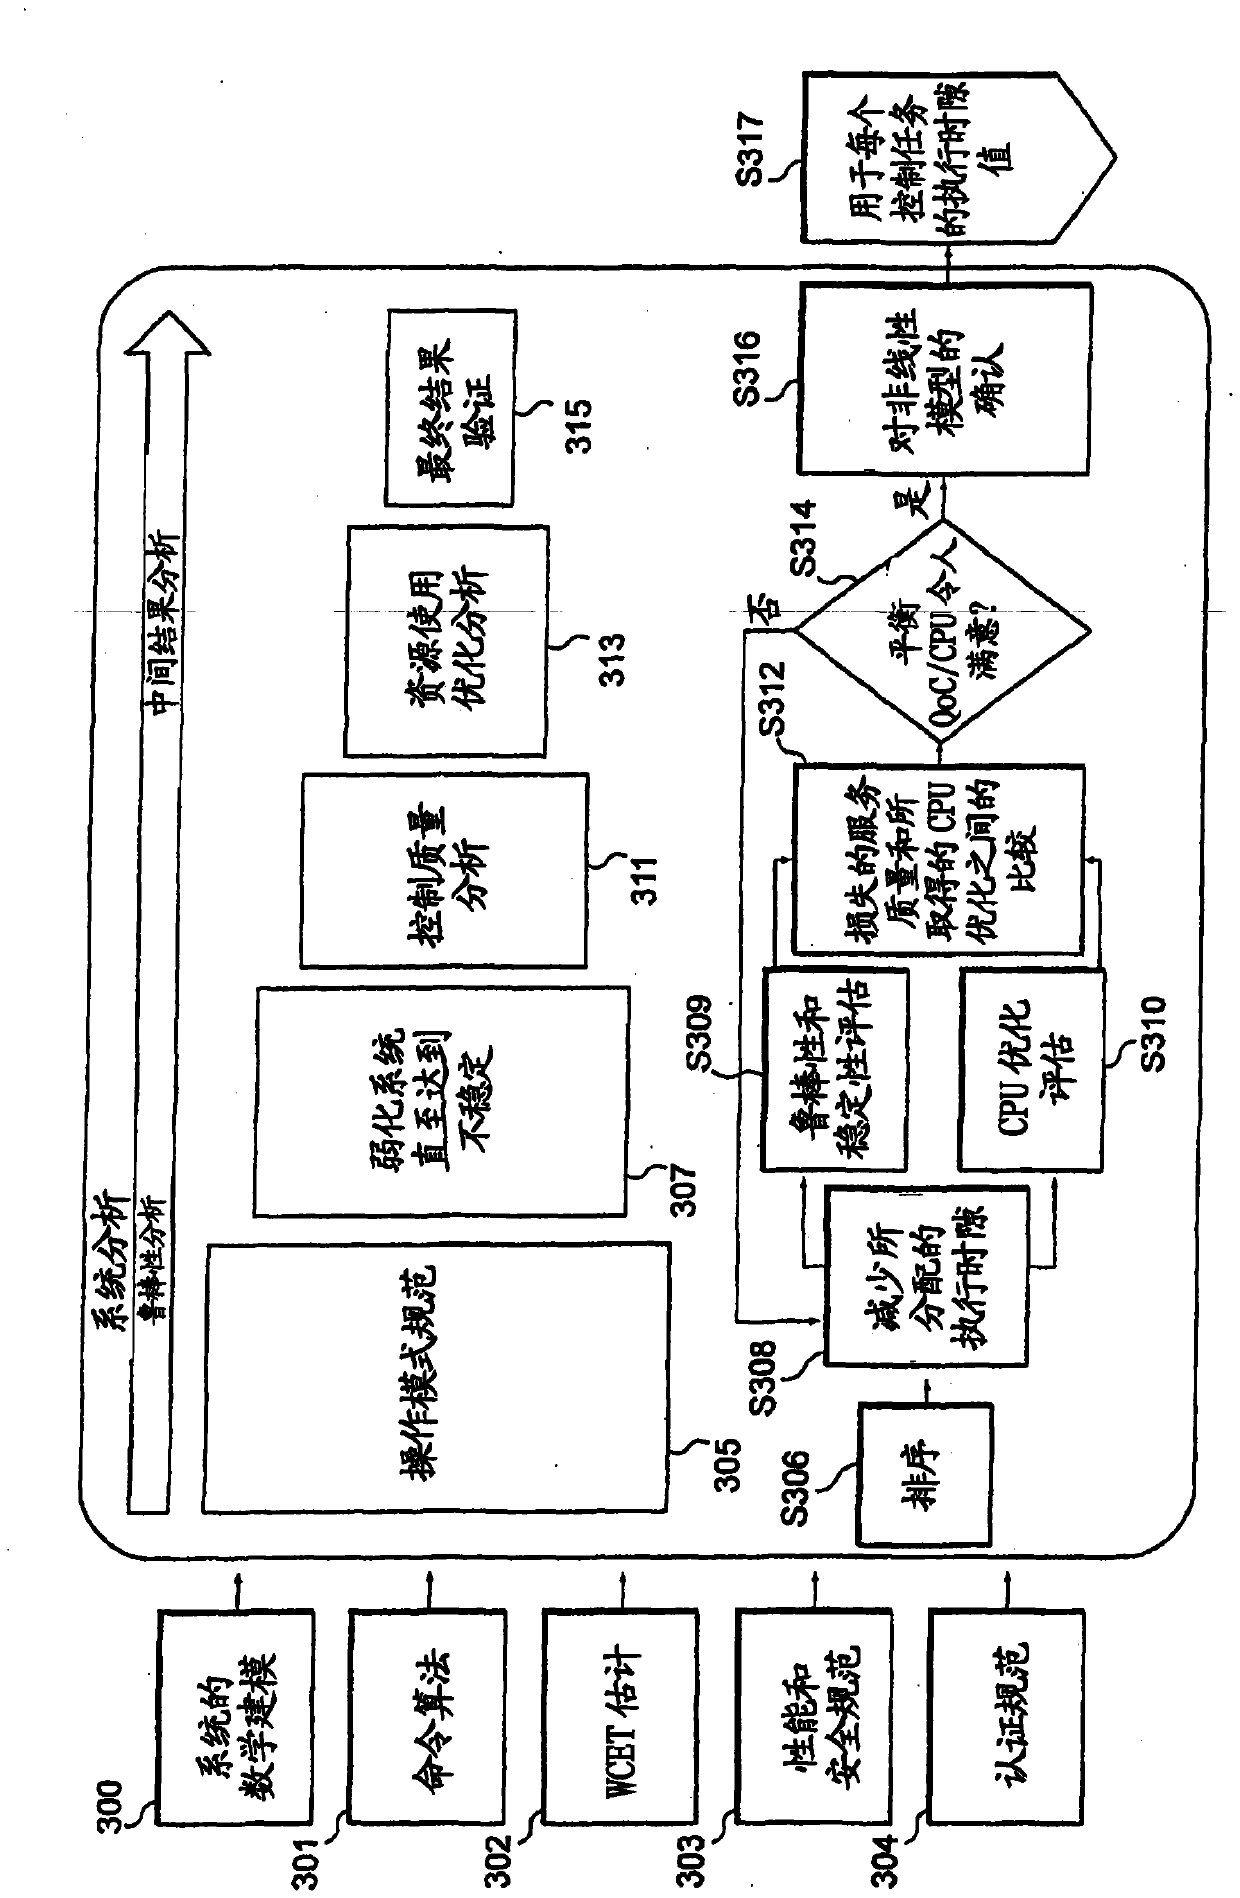 Robust system control method with short execution time